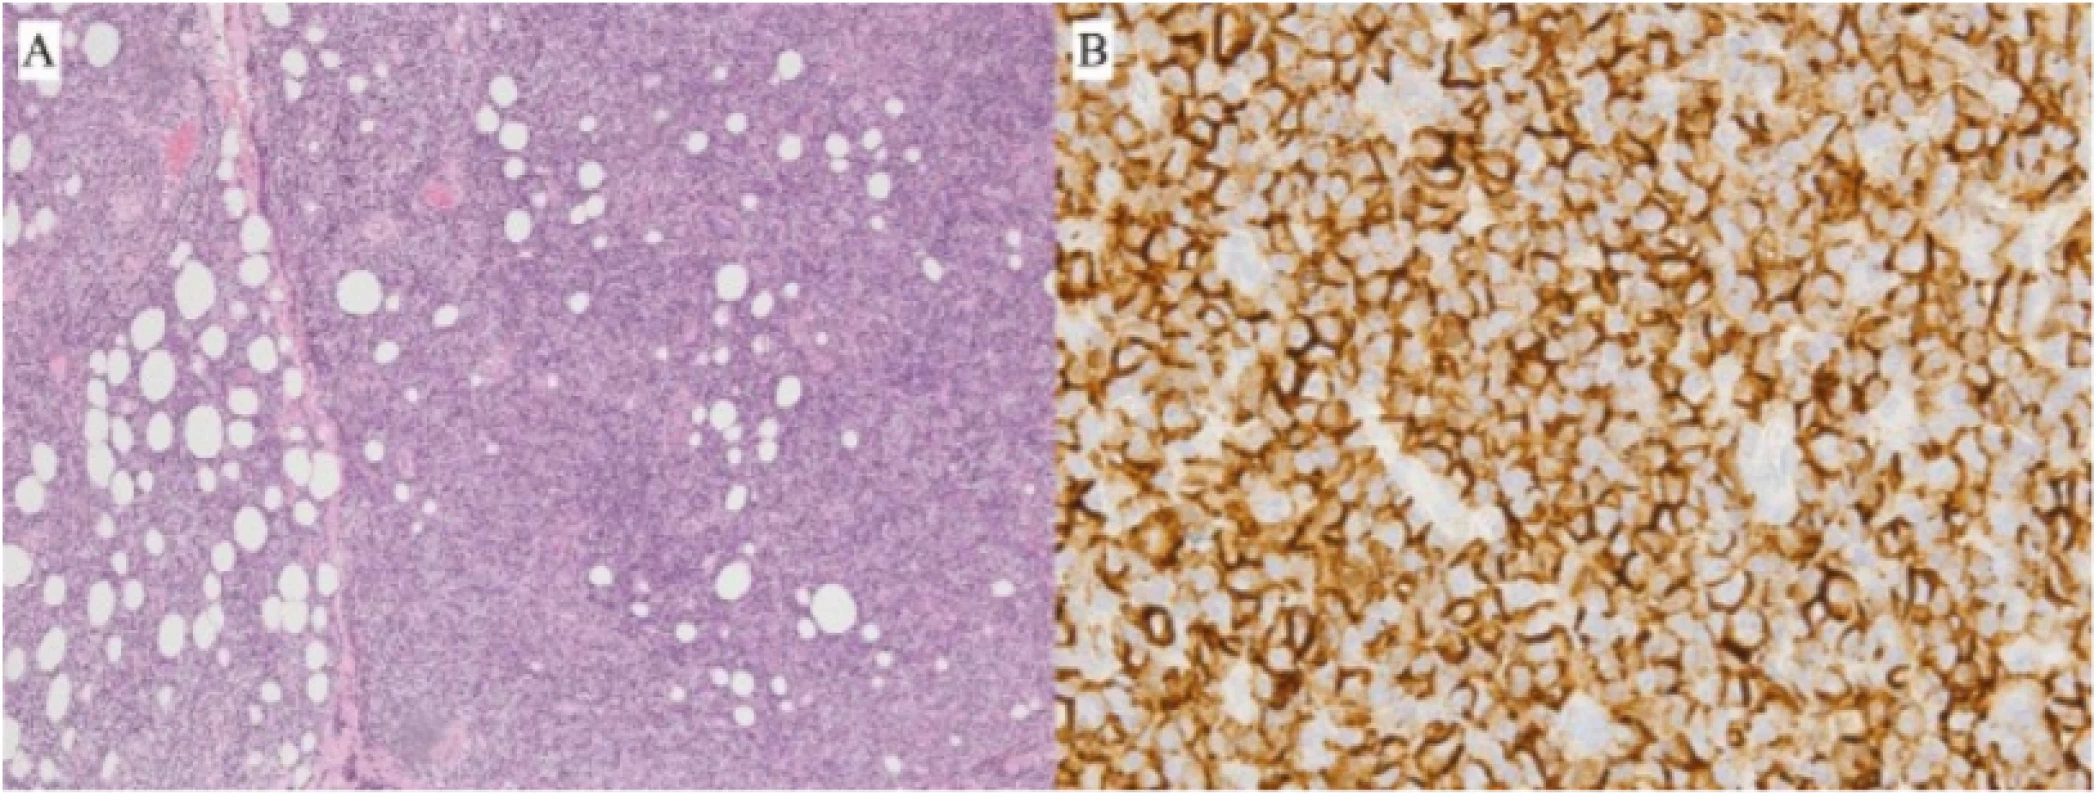 Patient 2 – B-NHL from spectrum of MZBL type malt, biopsy finding:<br>
A) Infiltration of fibrolipomatous conjunctiva with dense, diffuse tumorous lymphoproliferation from<br>
small to medium-sized lymphoid cells (HE, enlargement 100x)<br>
B) Immunohistochemical positivity of CD20+ marker in tumour cells (enlargement 630x)